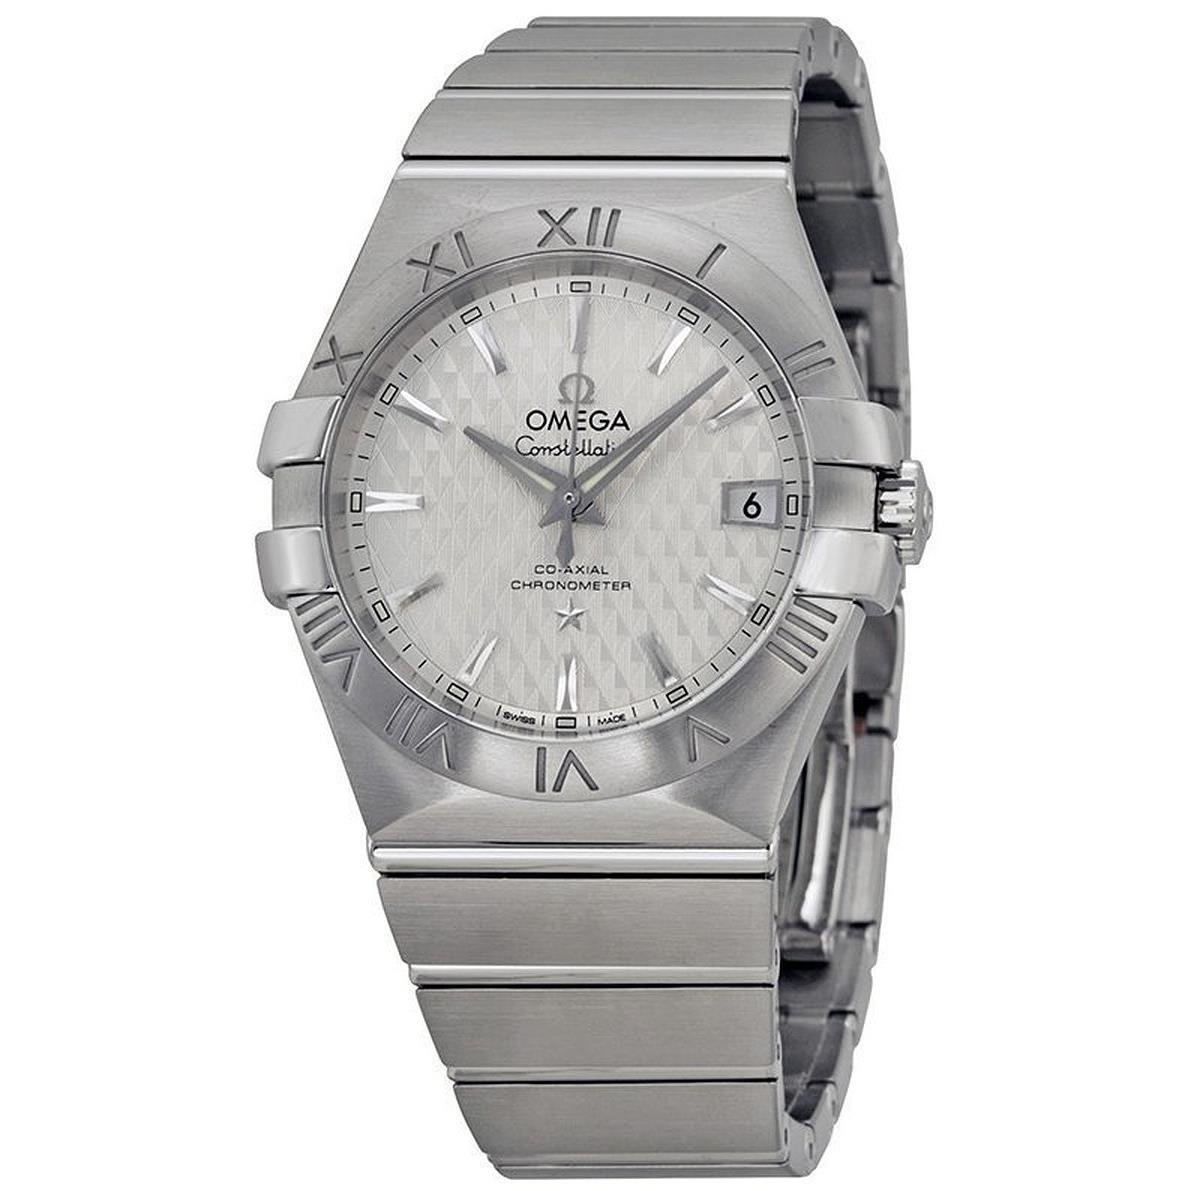 Omega Men's Constellation Swiss-Automatic Watch with Stainless-Steel Strap, Silver, 15 (Model: 12310352002002)